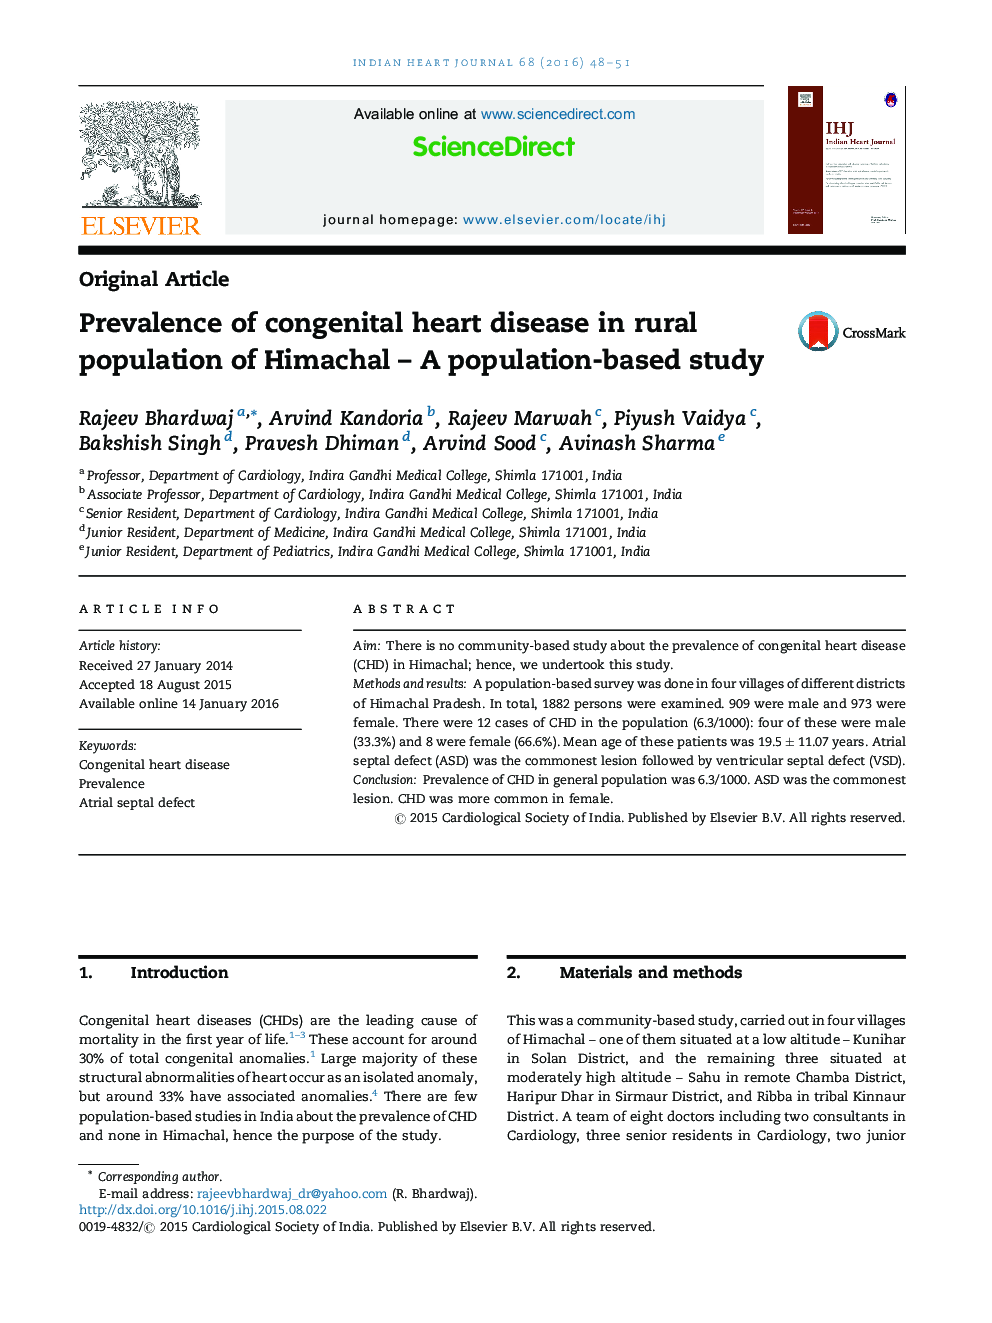 Prevalence of congenital heart disease in rural population of Himachal – A population-based study